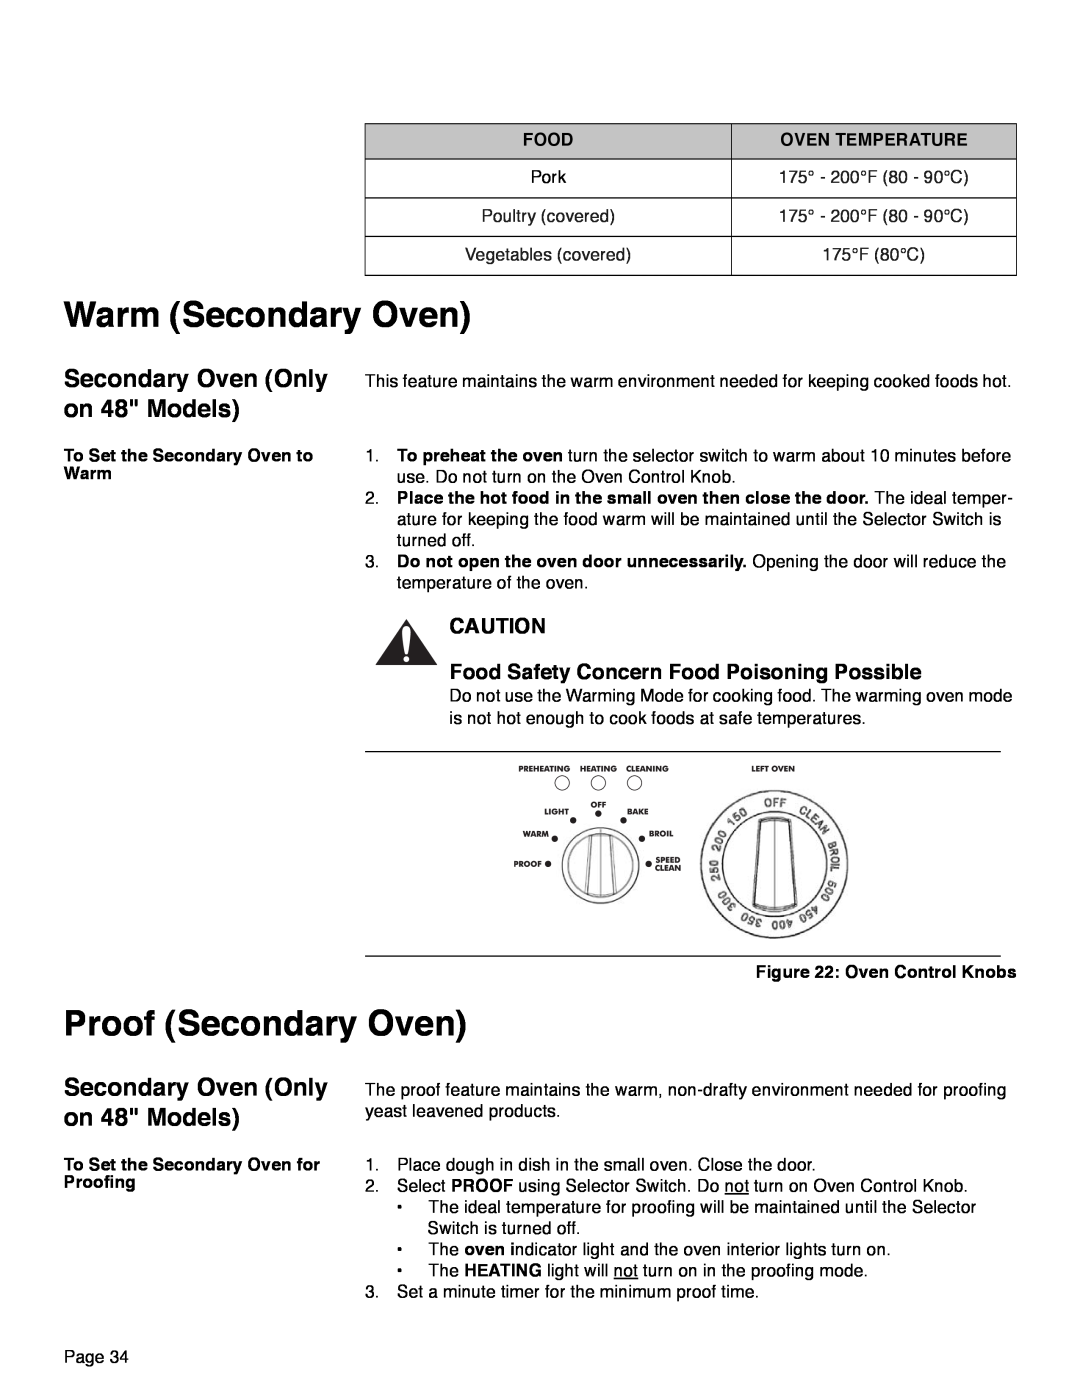 Thermador PRD36, PRD48 Secondary Oven Only on 48 Models, Food Safety Concern Food Poisoning Possible, Oven Temperature 